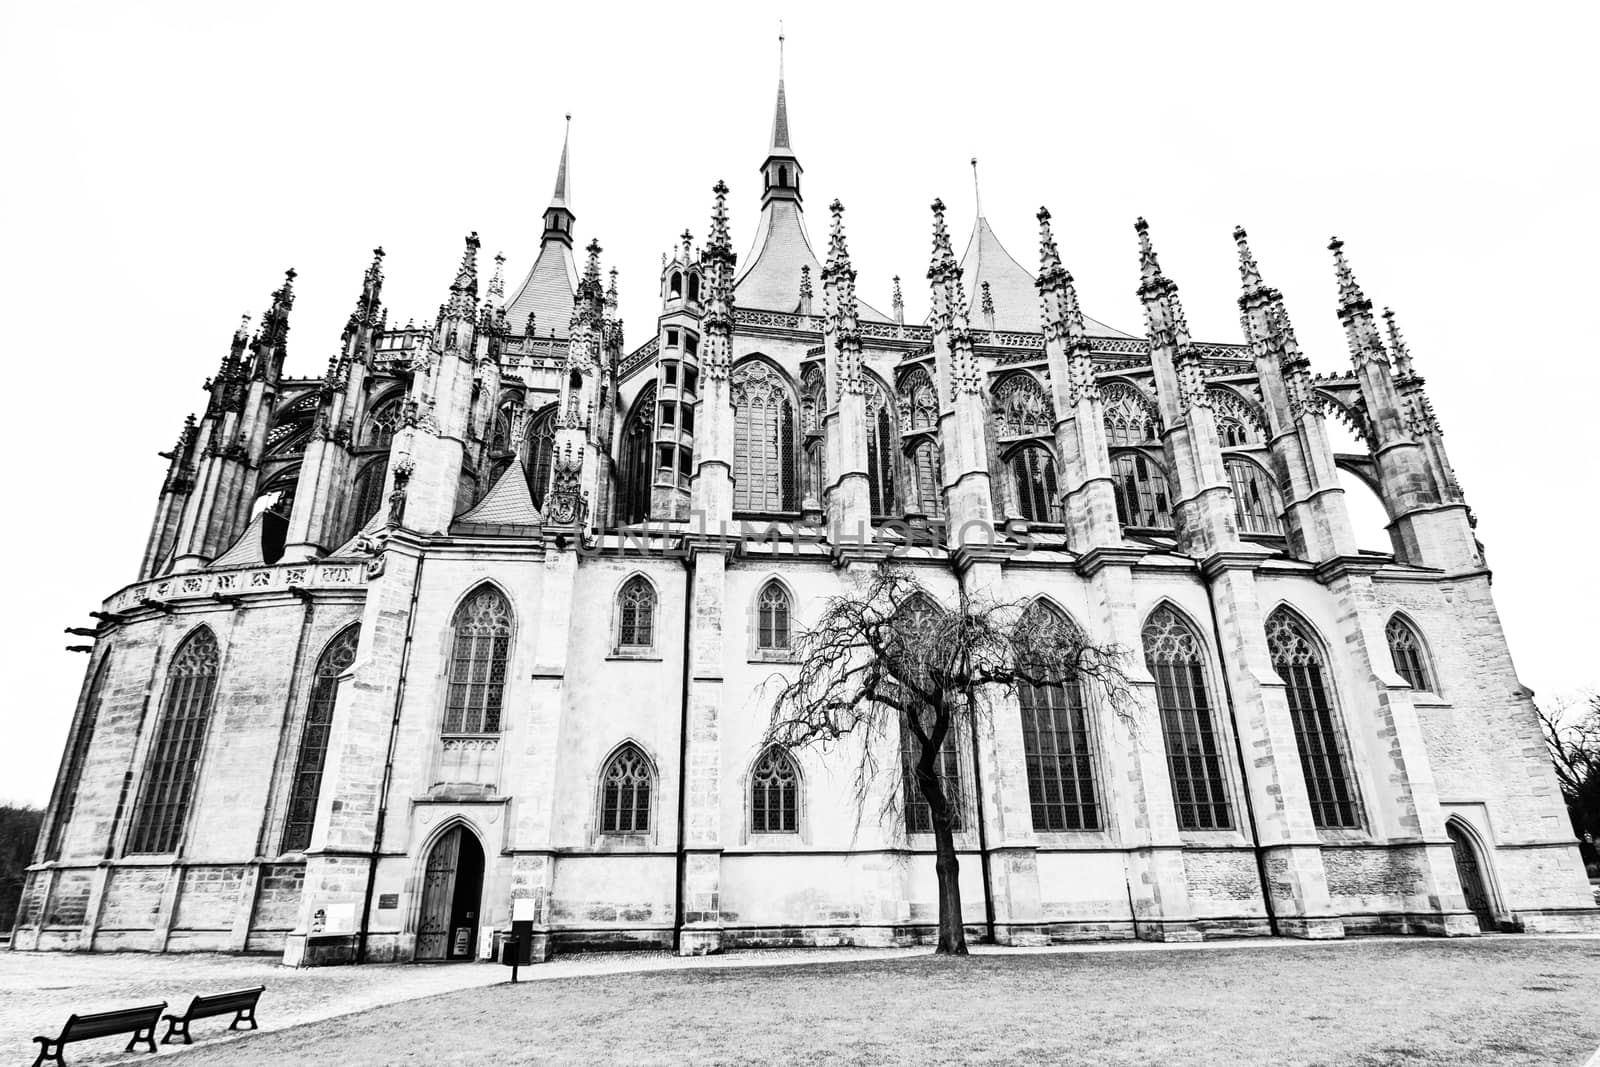 Saint Barbara's Church (often incorrectly Saint Barbara Cathedral) in Kutna Hora (Bohemia) is one of the most famous Gothic churches in central Europe and it is a UNESCO world heritage site. St Barbara is the patron saint of miners (among others), which was highly appropriate for a town whose wealth was based entirely upon its silver mines.Construction began in 1388, but because work on the church was interrupted several times, it was not completed until 1905. The first architect was probably Johann Parler, son of Peter Parler, but studies say that Peter Parler had participated at least as a co-author of the draft design. Work on the building was interrupted for more than 60 years during the Hussite Wars and when work resumed in 1482, Matej Rejsek and Benedikt Rejt, two architects from Prague, assumed responsibility. Kutna Hora, Czech republic.